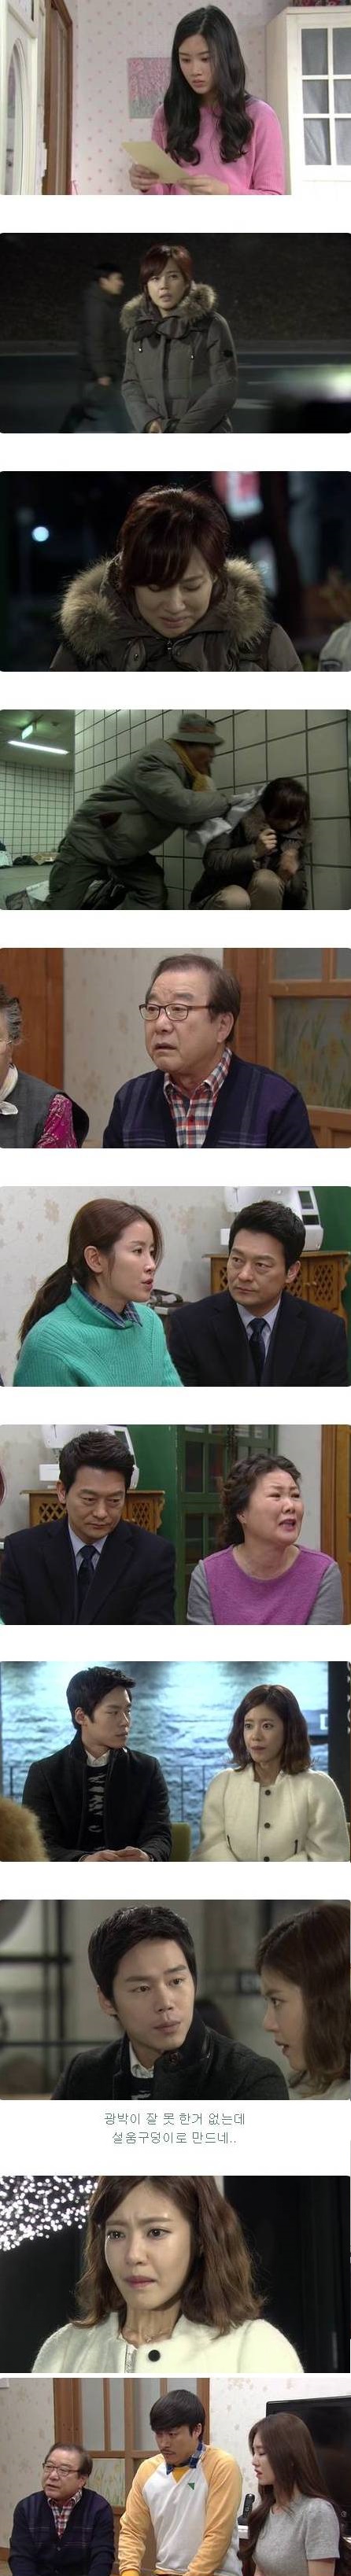 episodes 41 and 42 captures for the Korean drama 'The Wang Family'